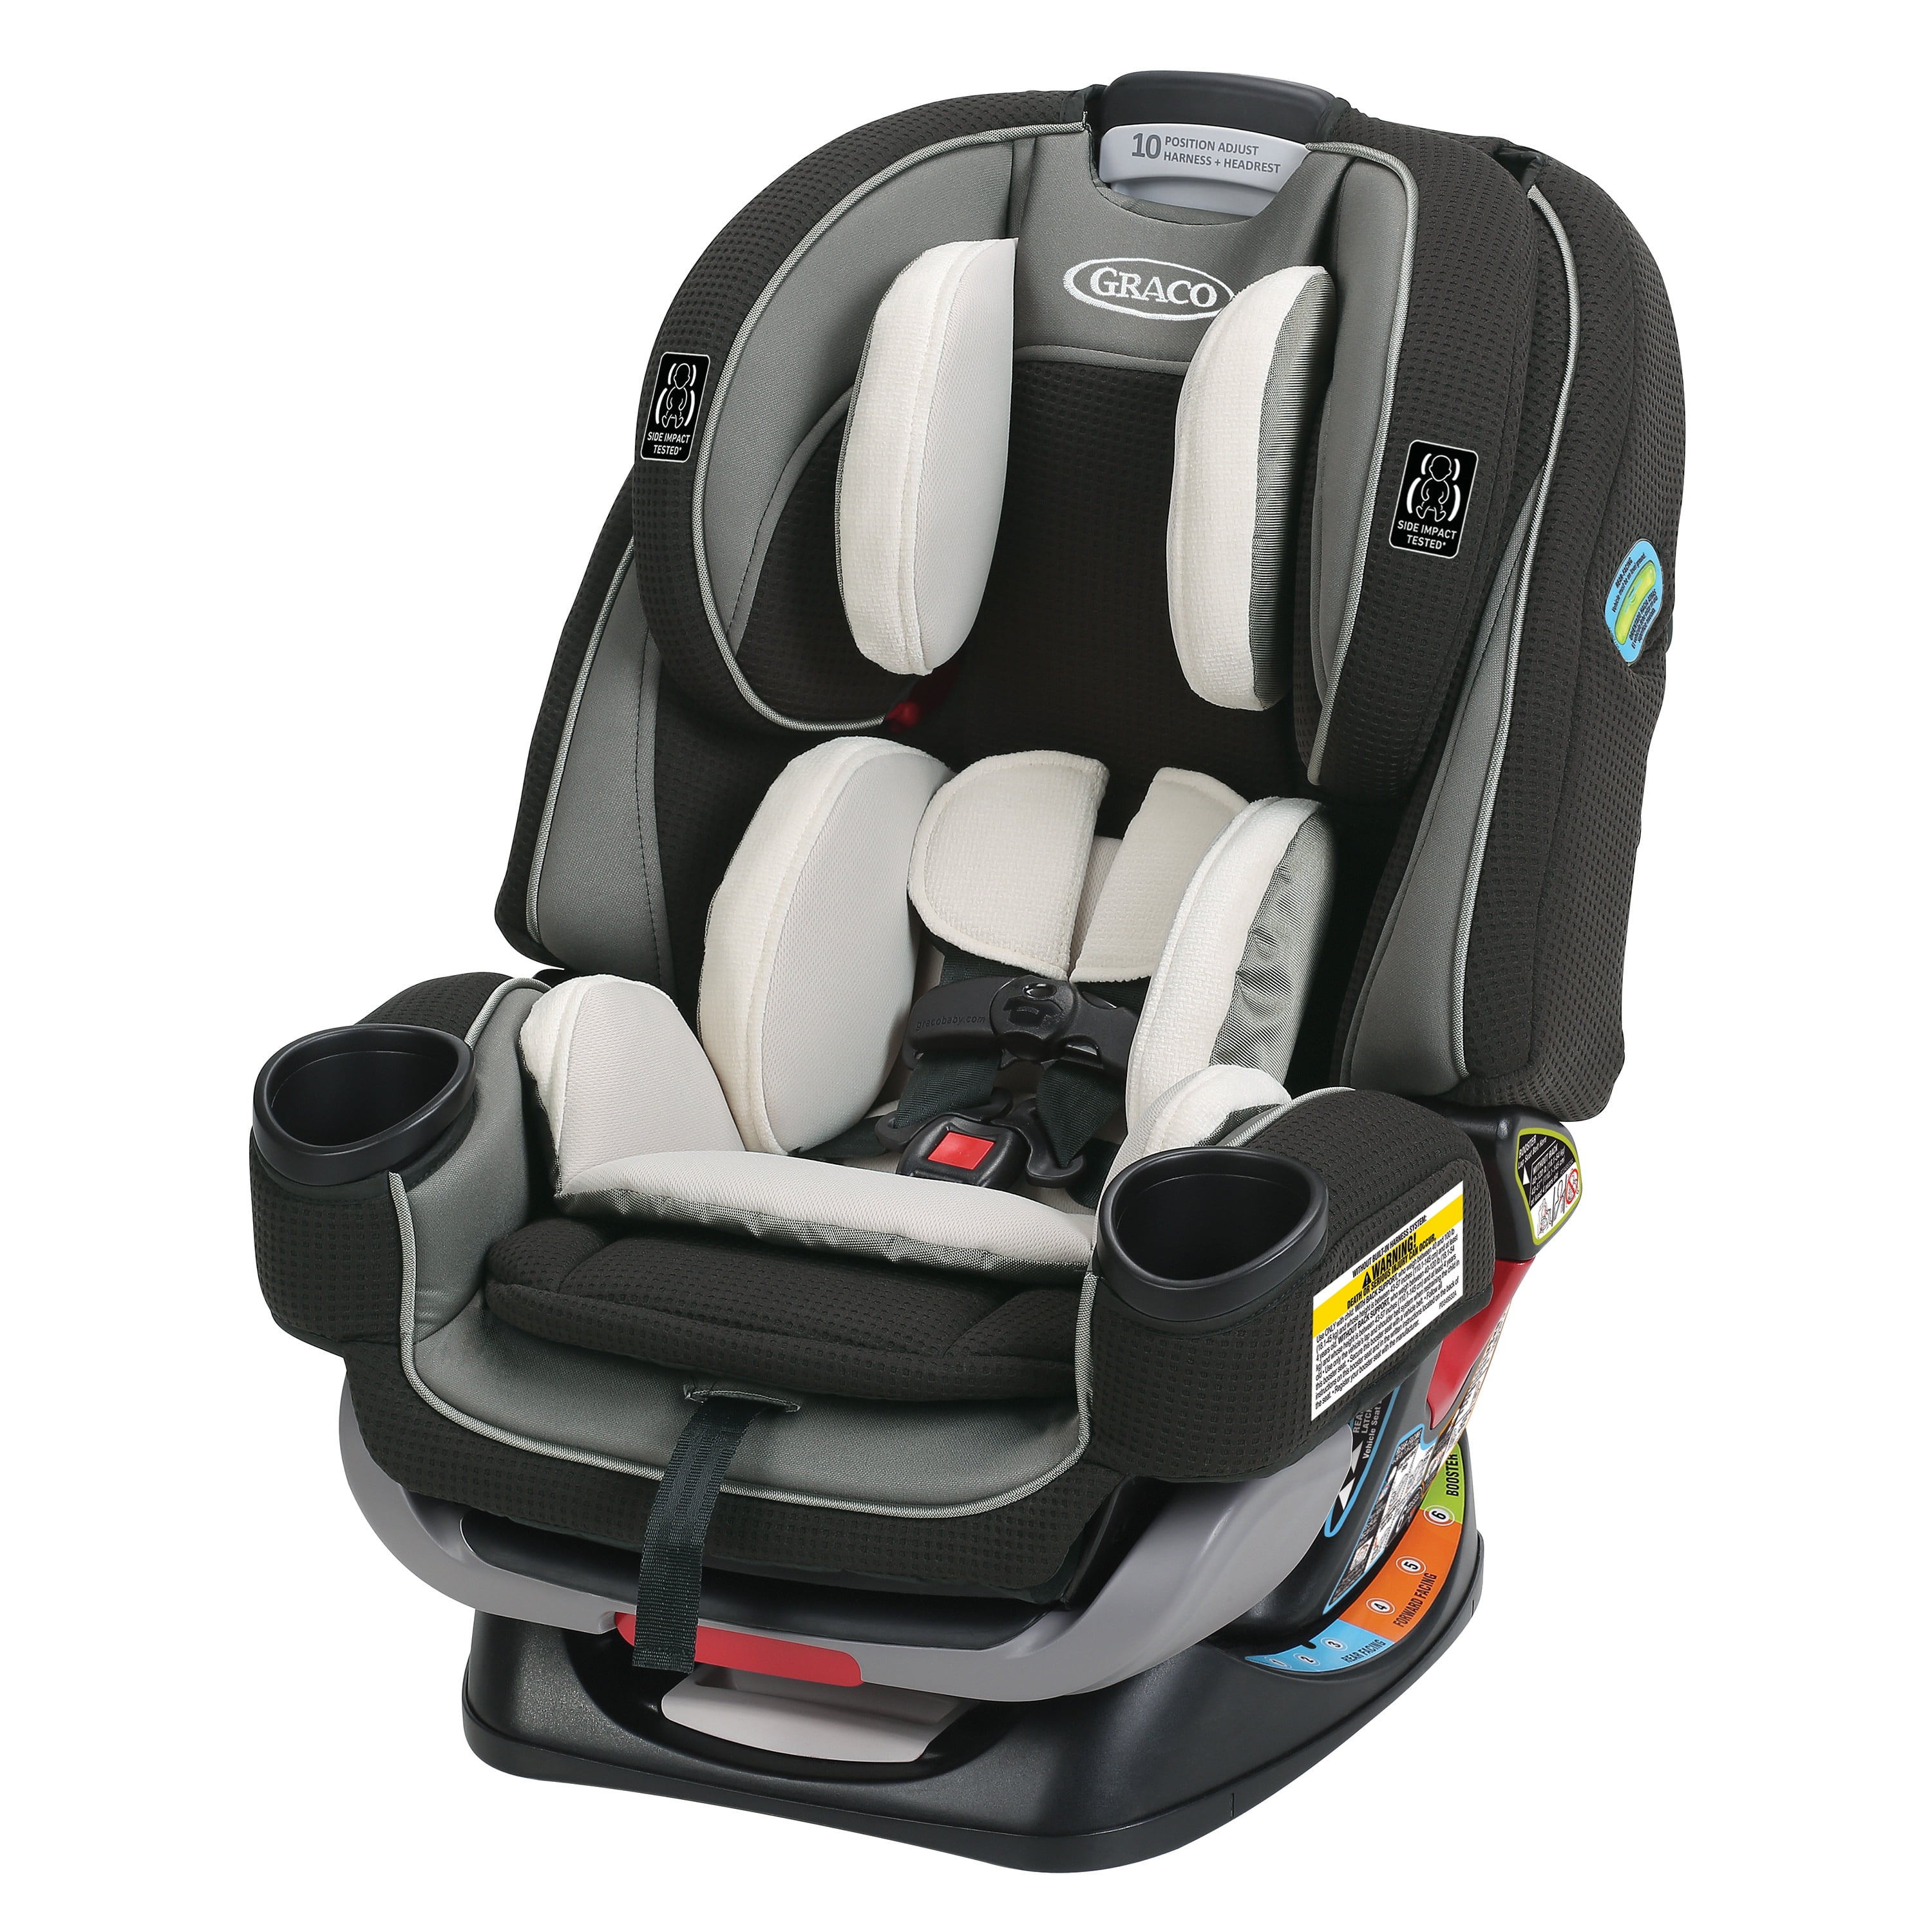 Graco Forever All In One Car Seat Installation – Velcromag